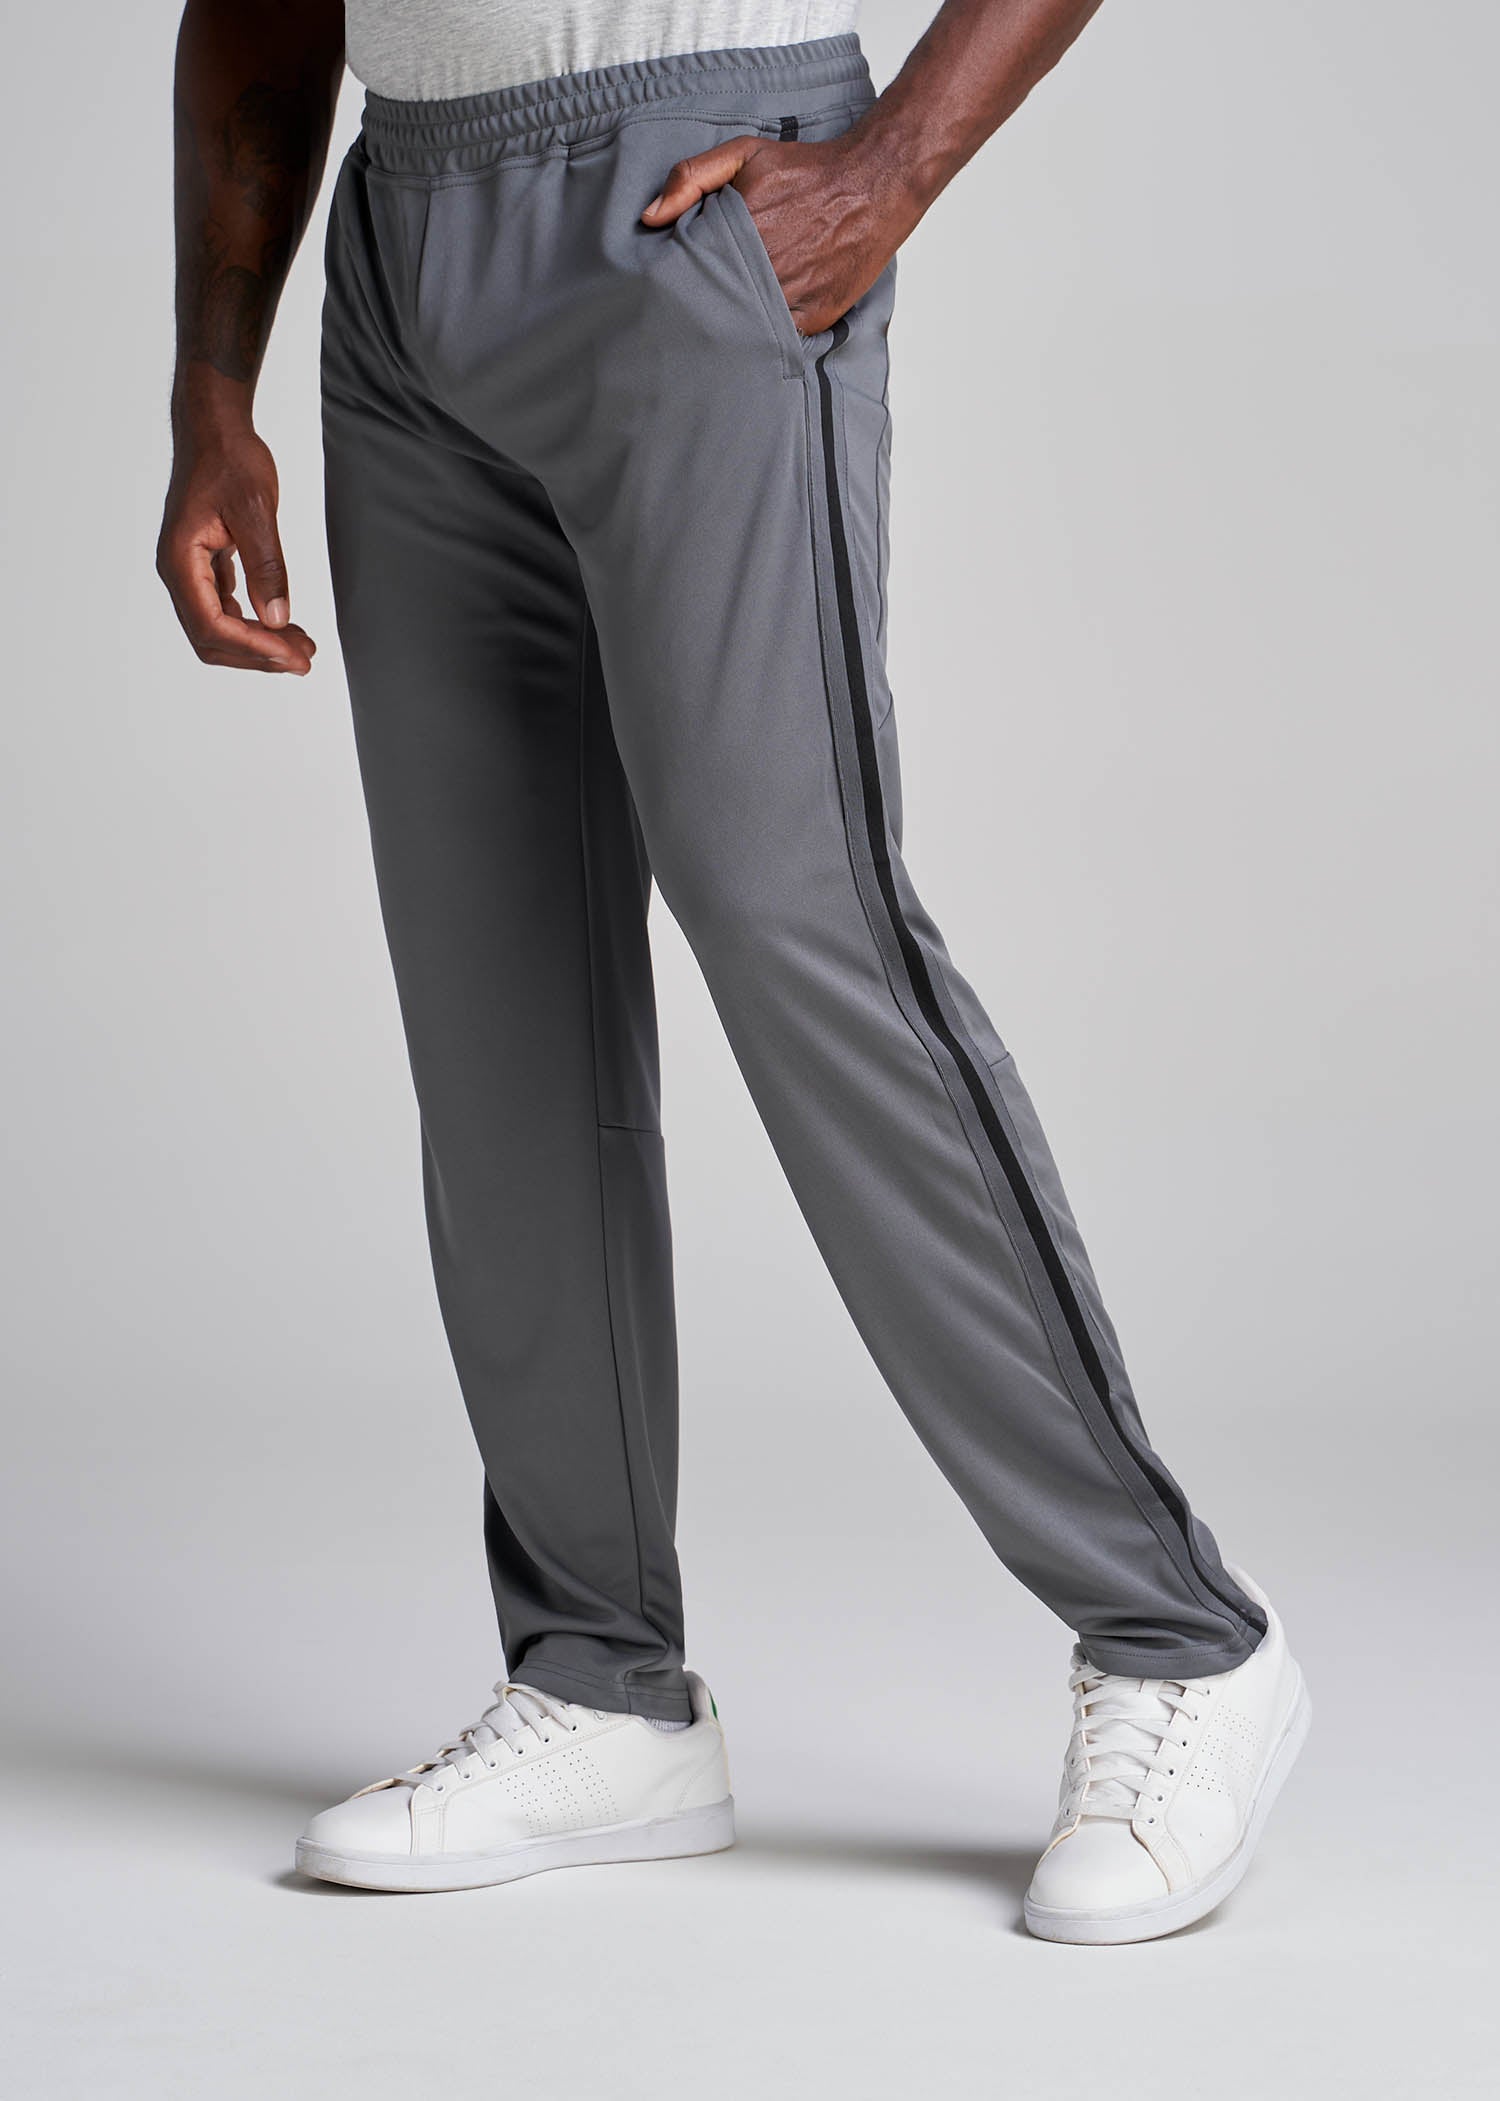 High Waisted Seamed Side Stripe Pull On Straight Ankle Pant